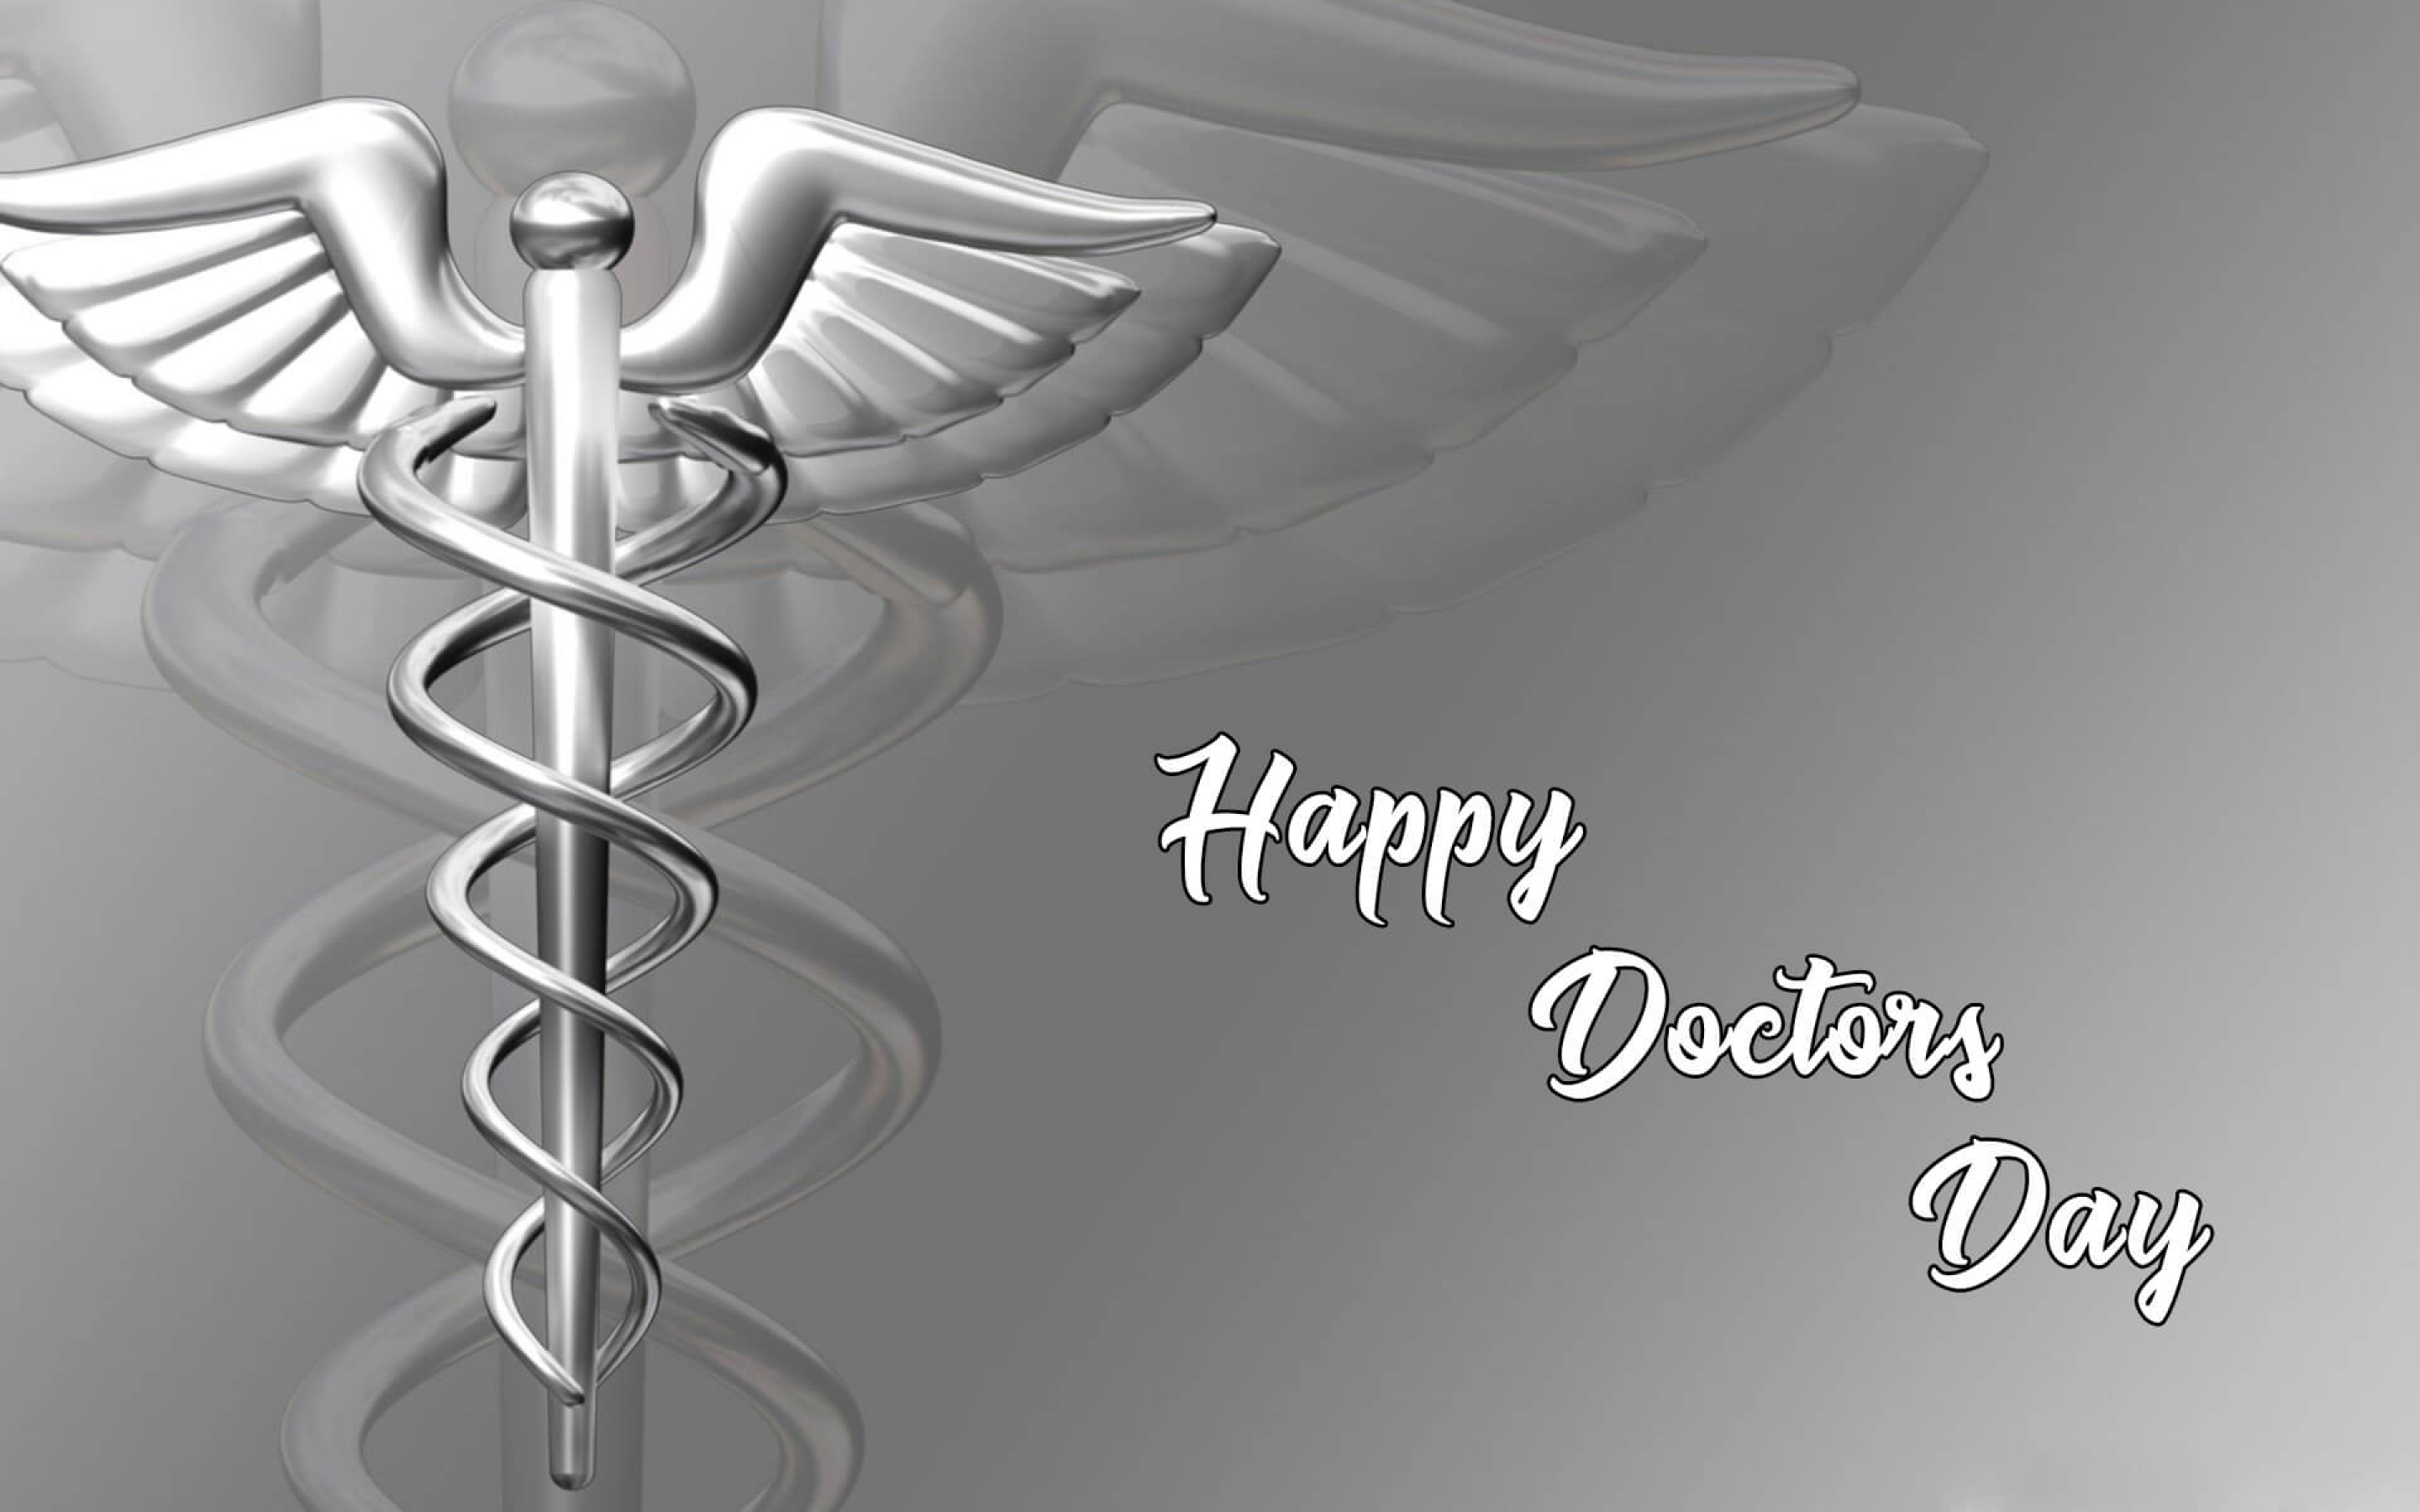 Happy Doctors Day Wishes Greetings Symbol HD Wallpaper